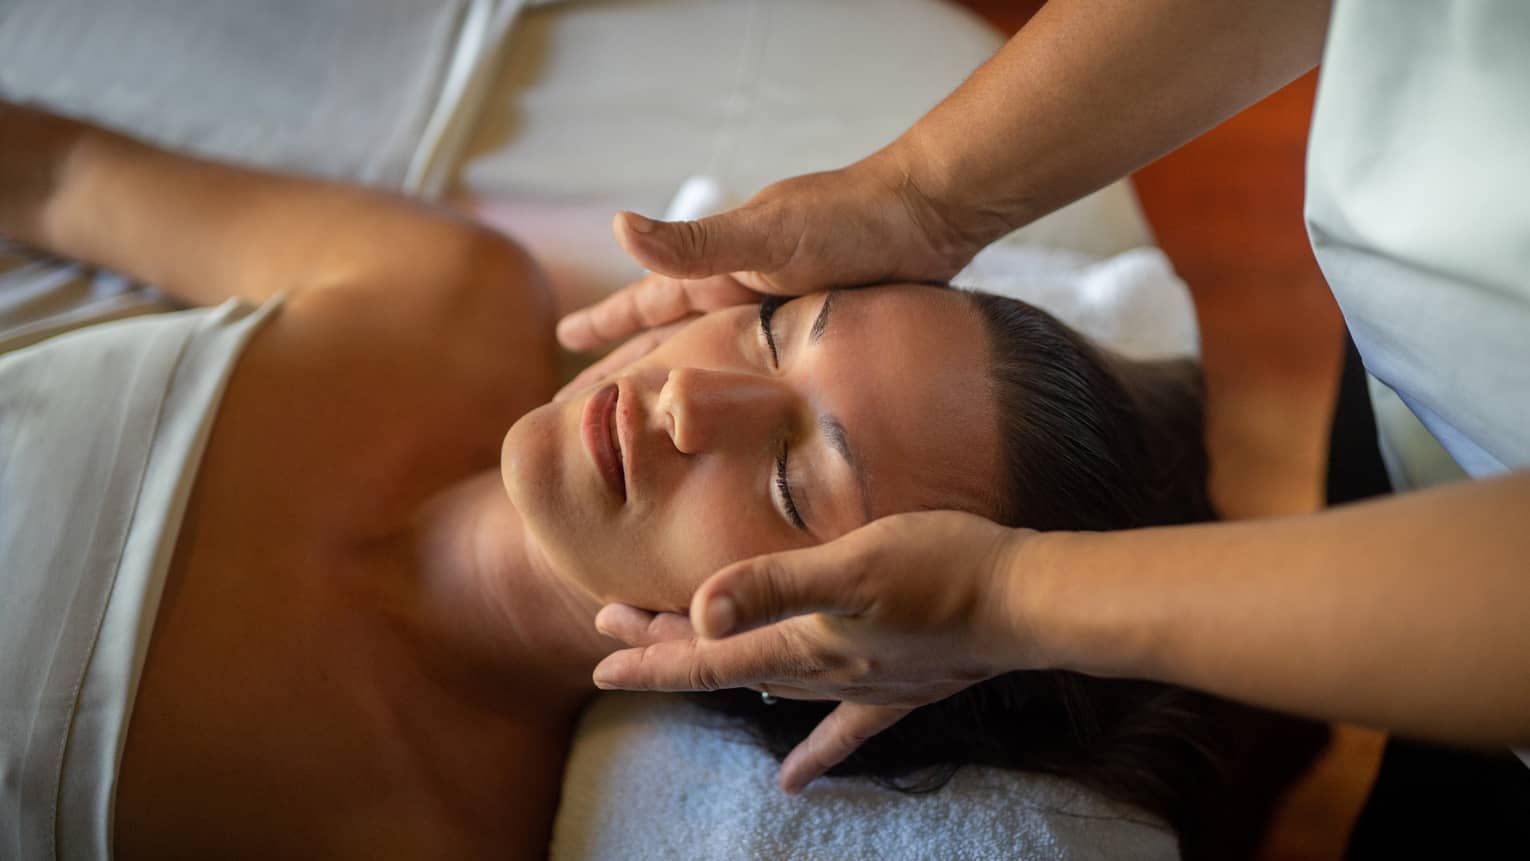 Woman lays on massage table with eyes closed as hands massage her cheeks and chin